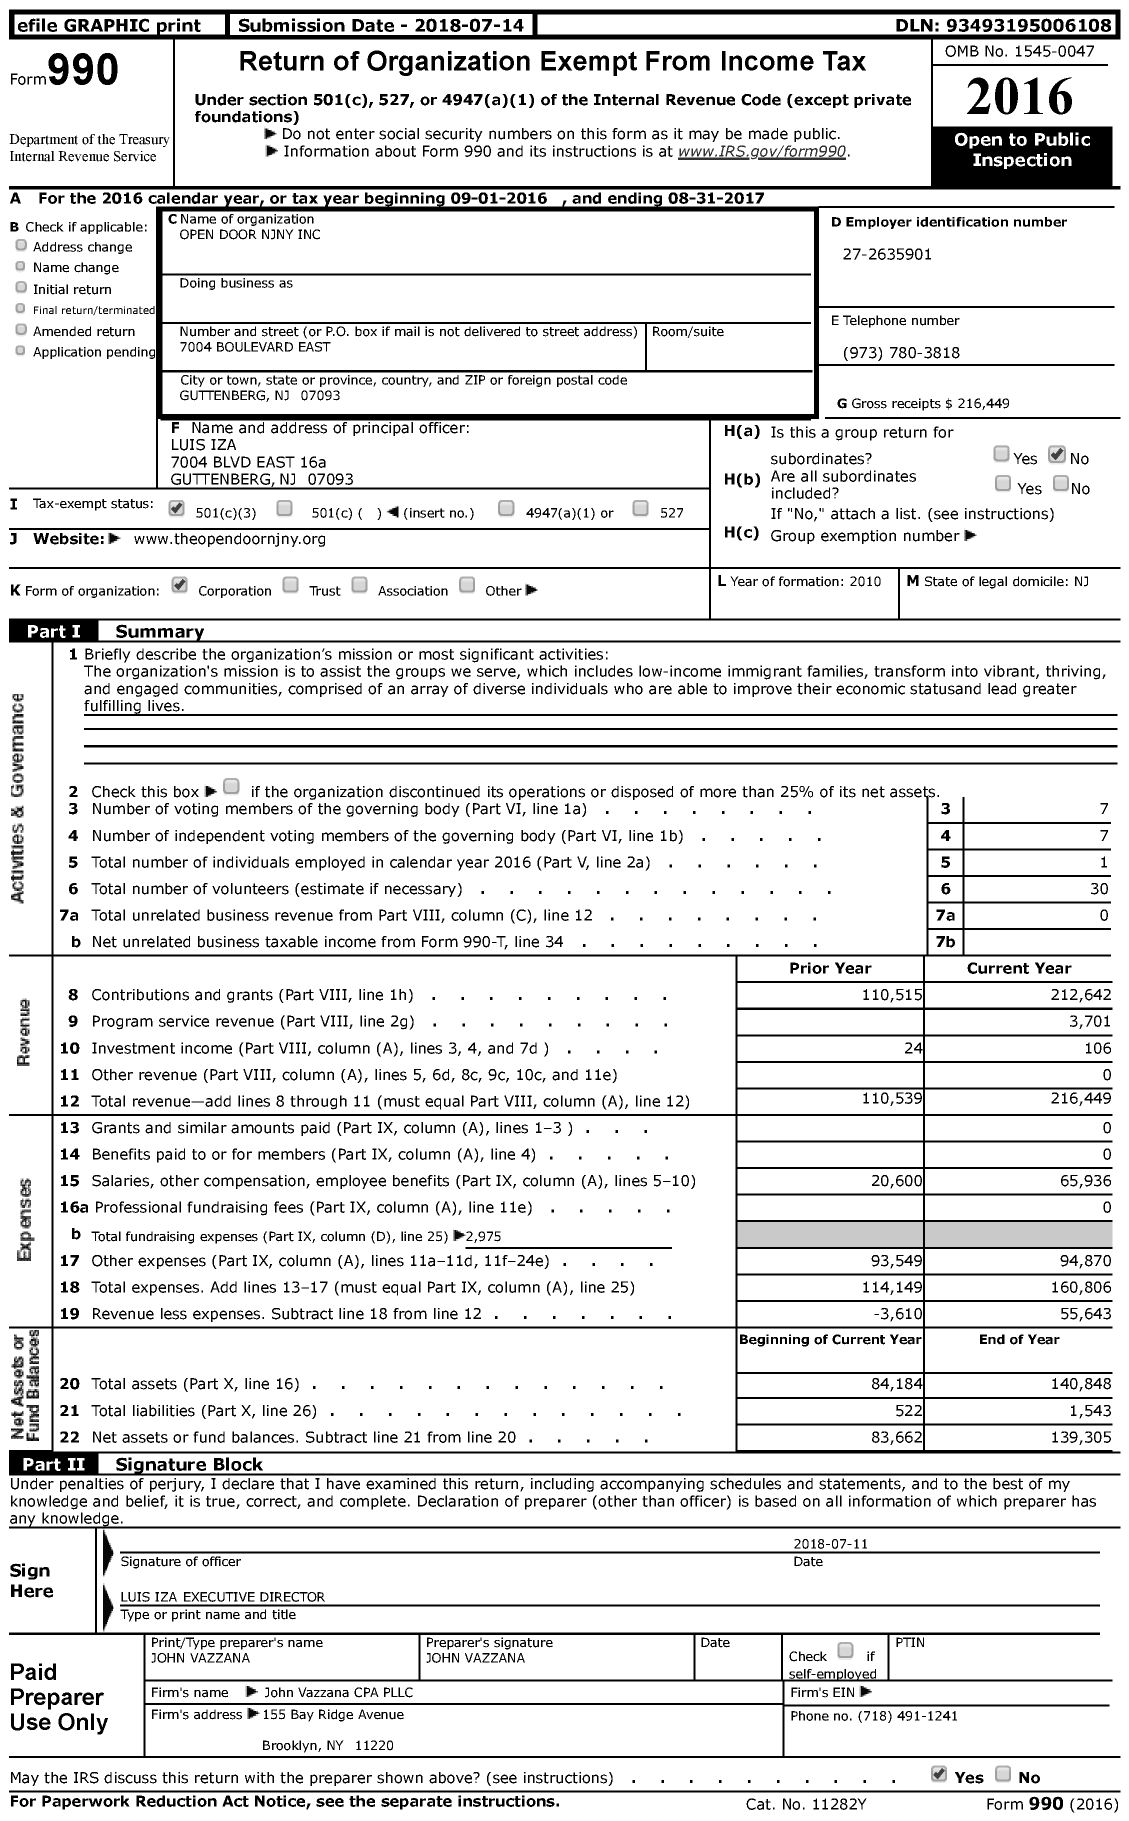 Image of first page of 2016 Form 990 for The Open Door NJNY